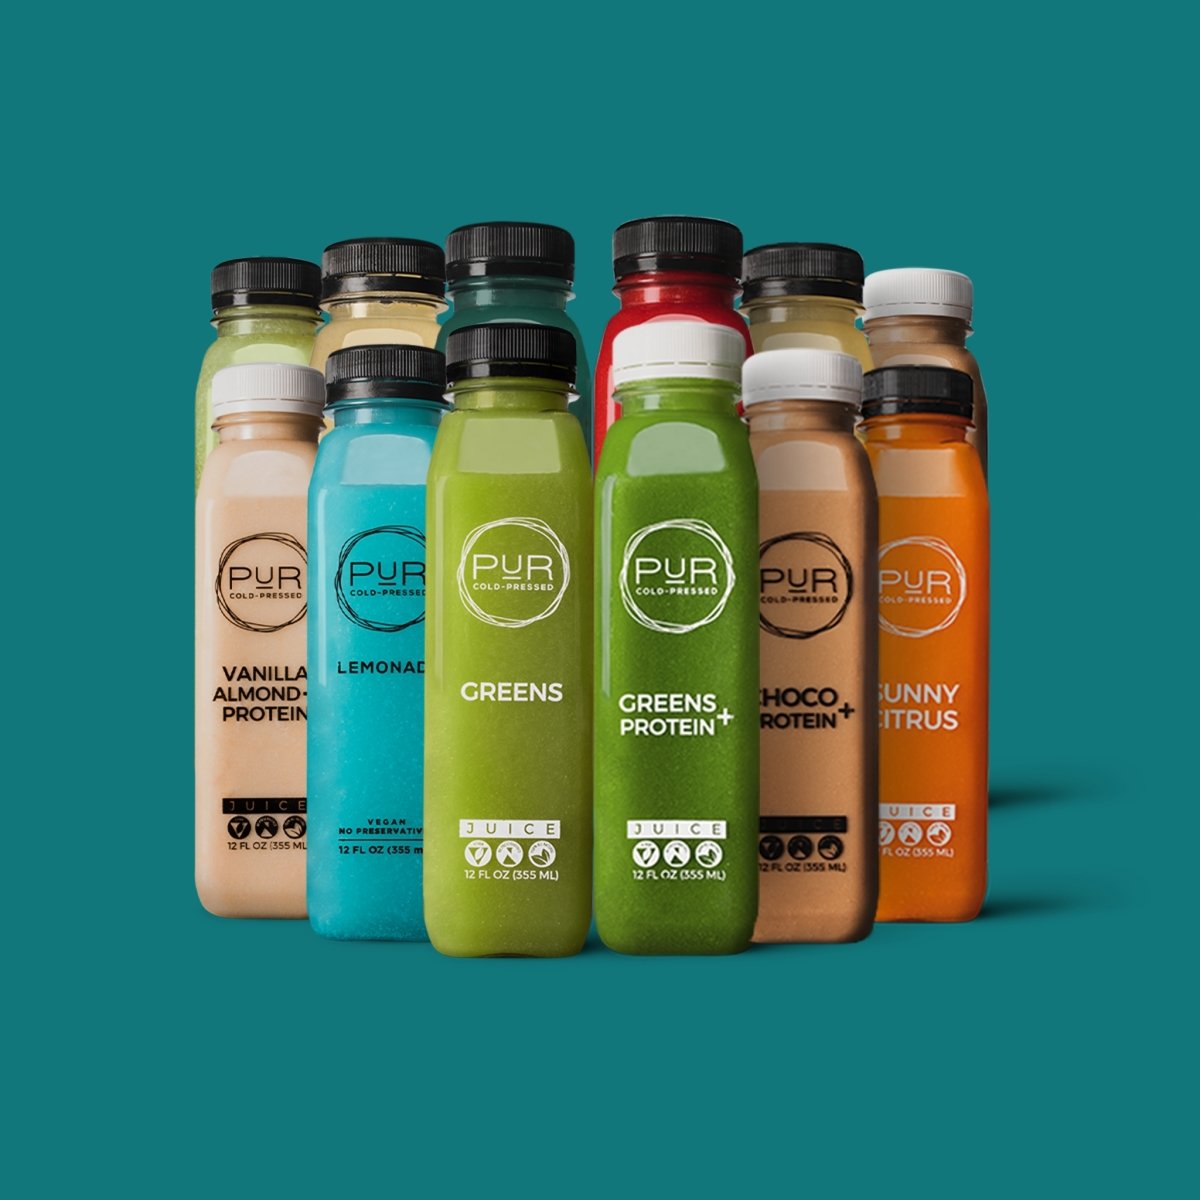 Discovery Kits & CURs Cold Pressed Juices